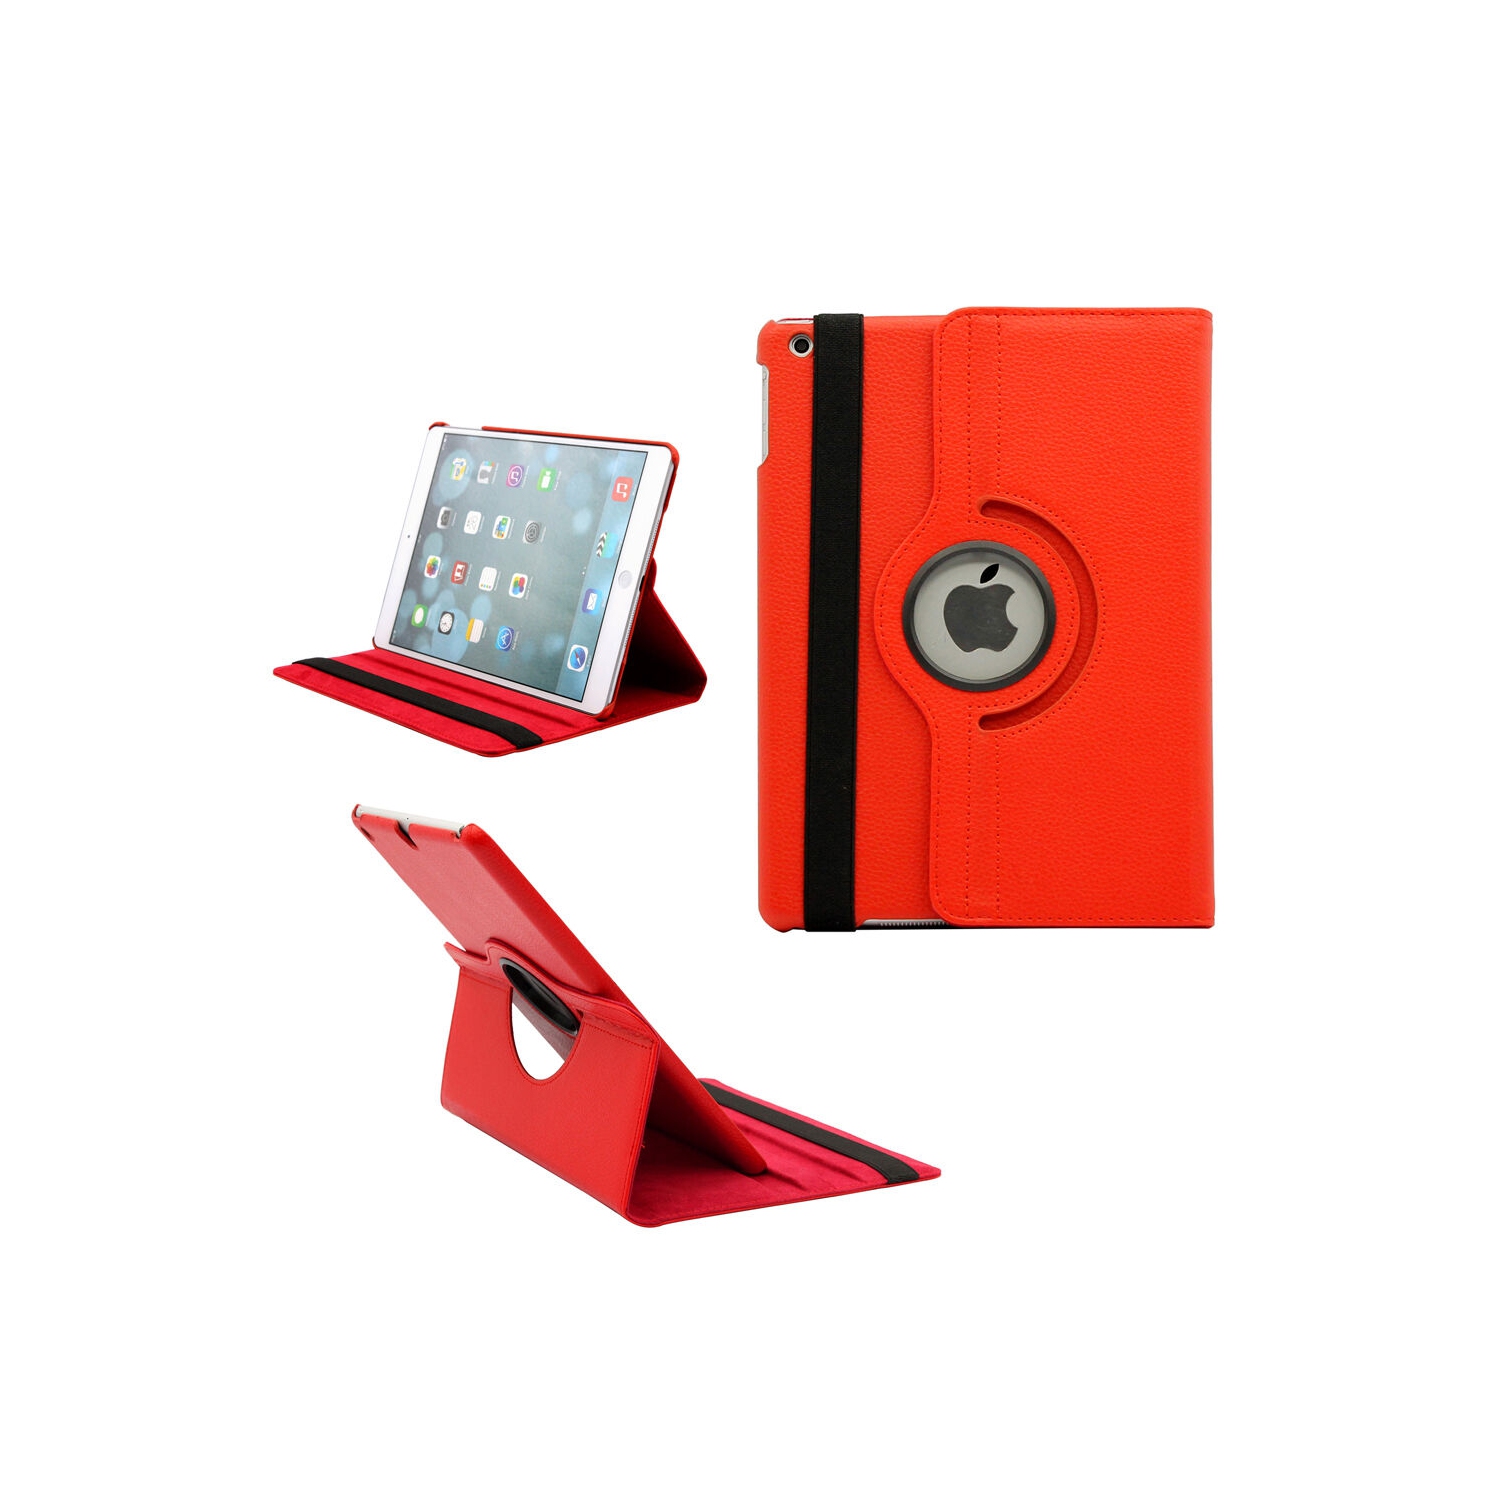 【CSmart】 360 Rotating PU Leather Stand Case Smart Cover for iPad Air 1 2 1st 2nd Gen, Red